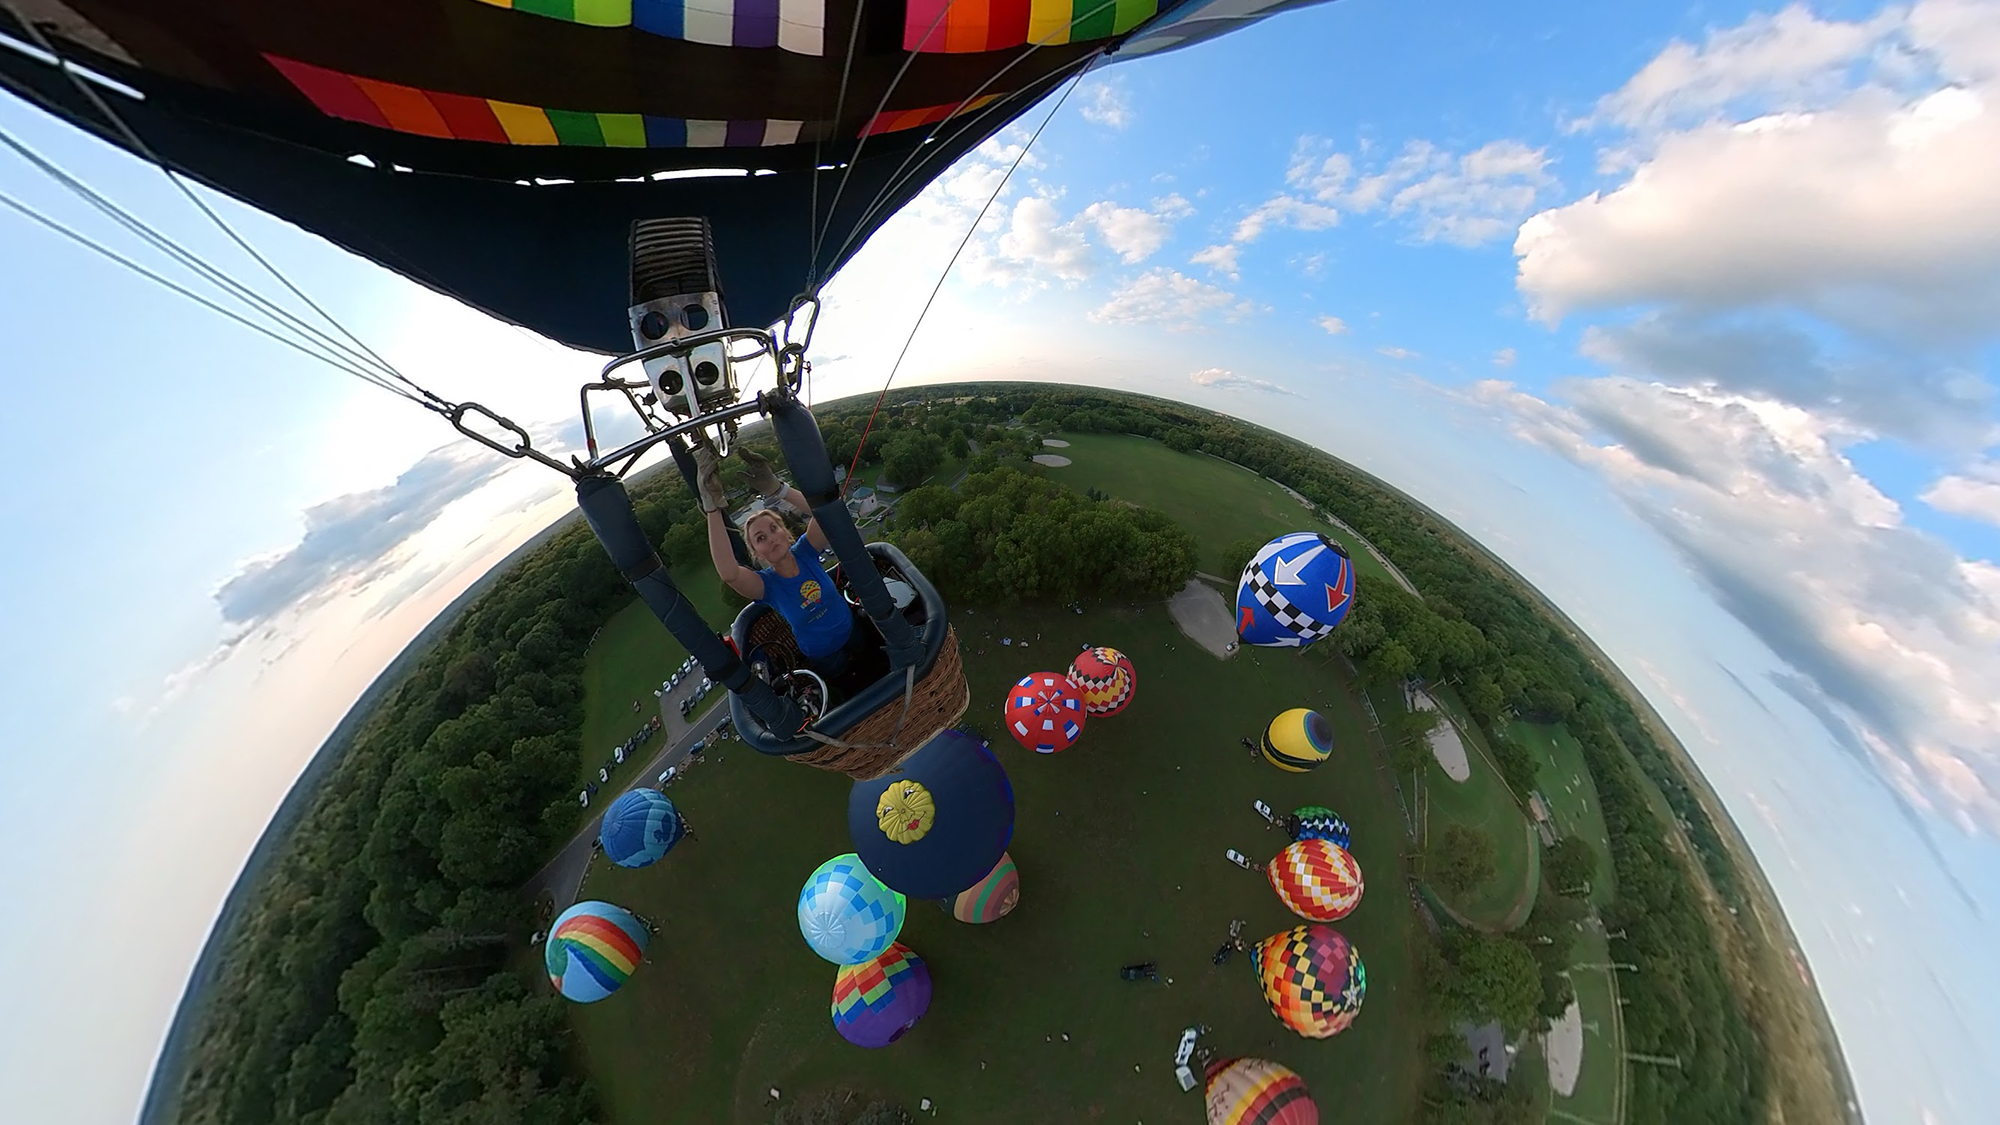 This hot air balloon pilot learned how to follow the wind from her dad